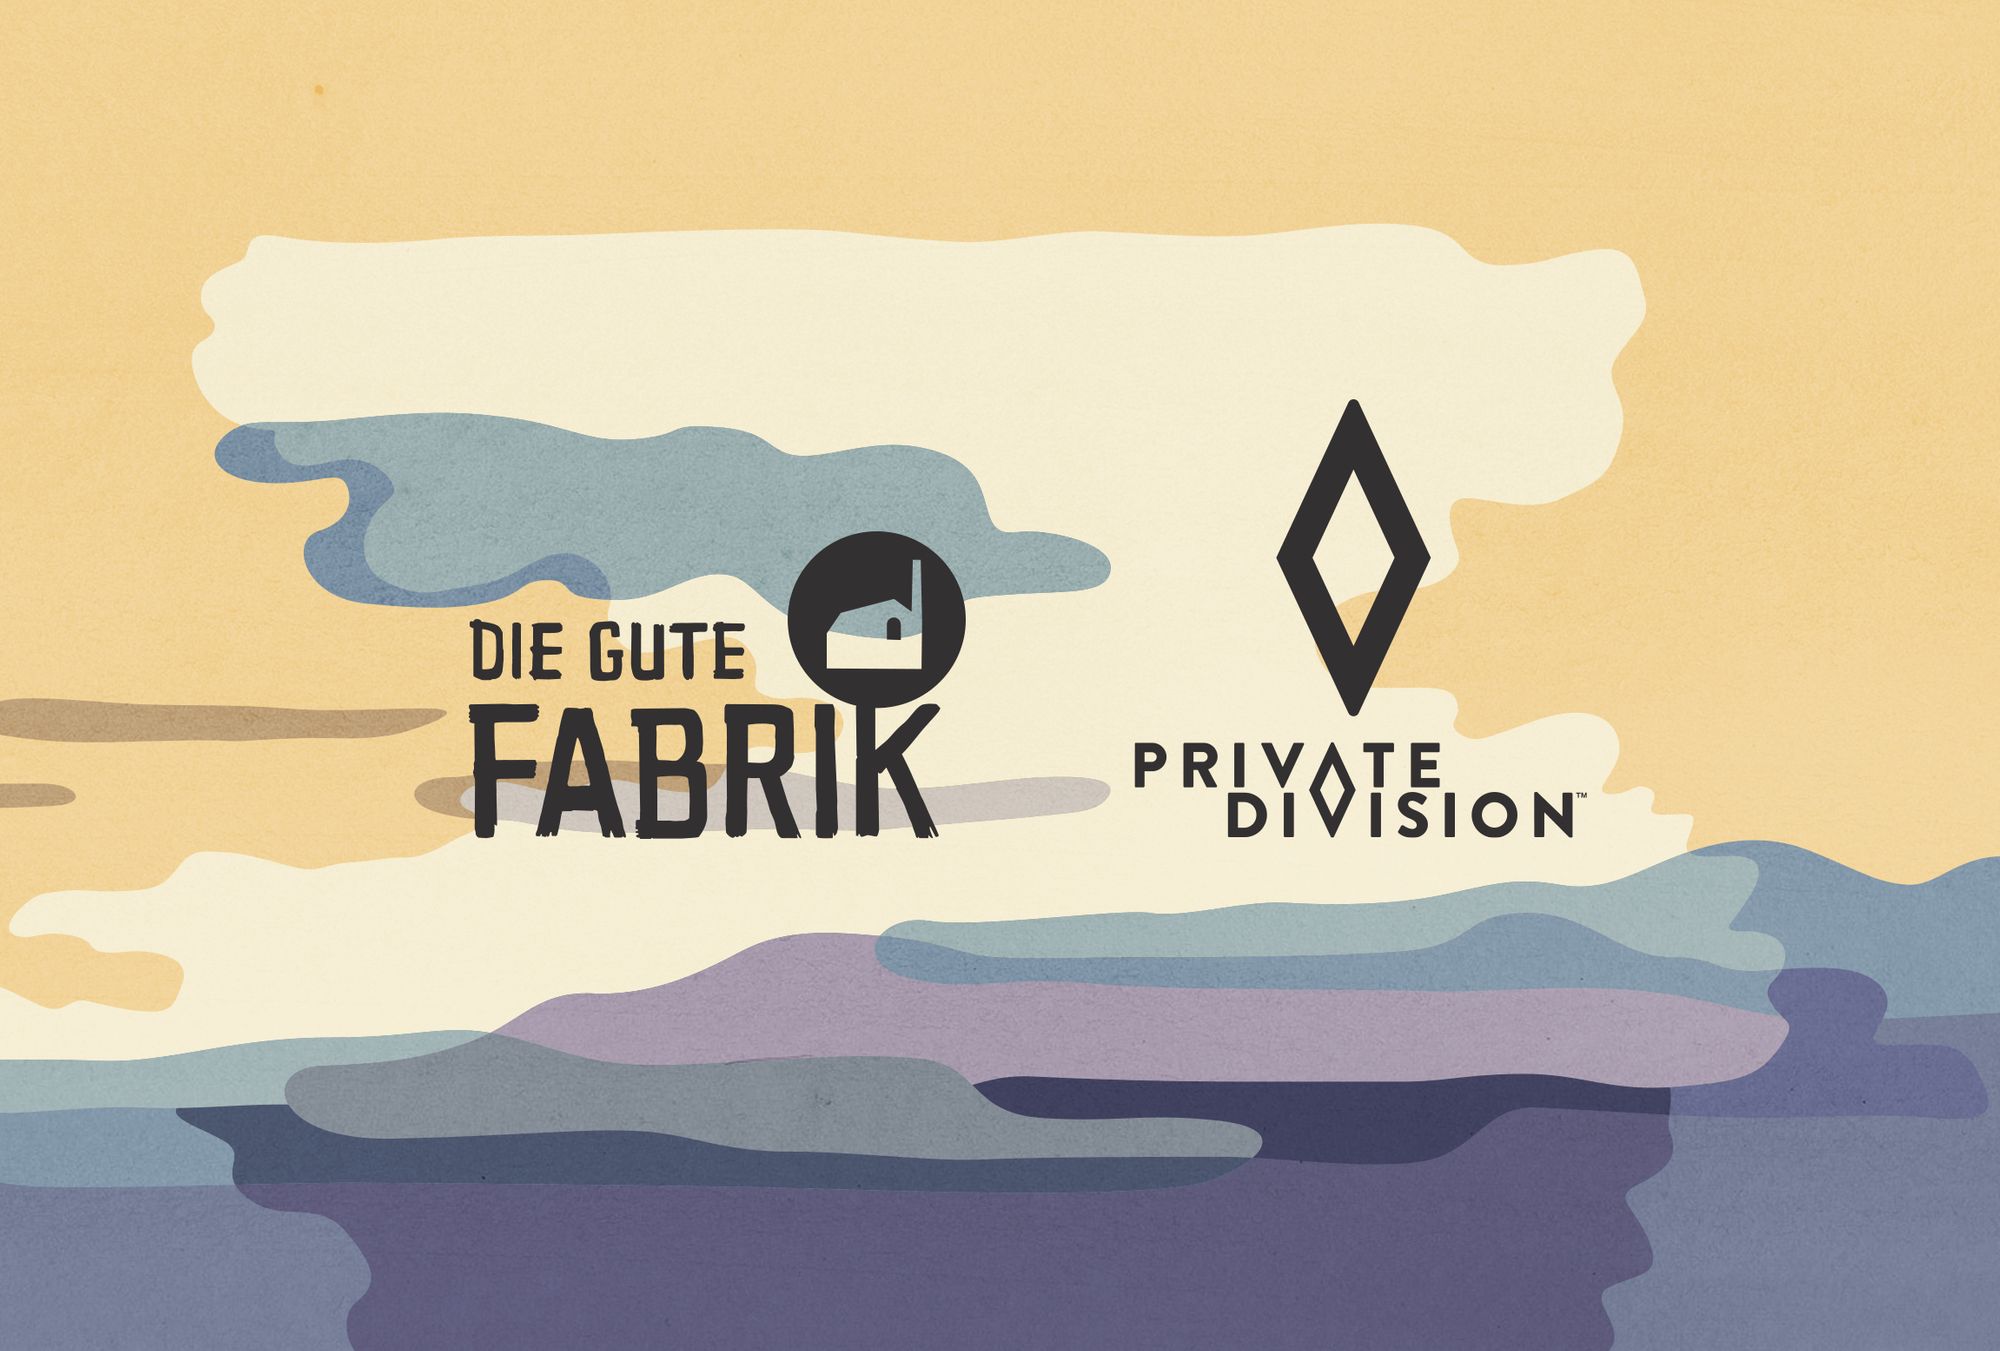 Announcing: Private Division & Die Gute Fabrik